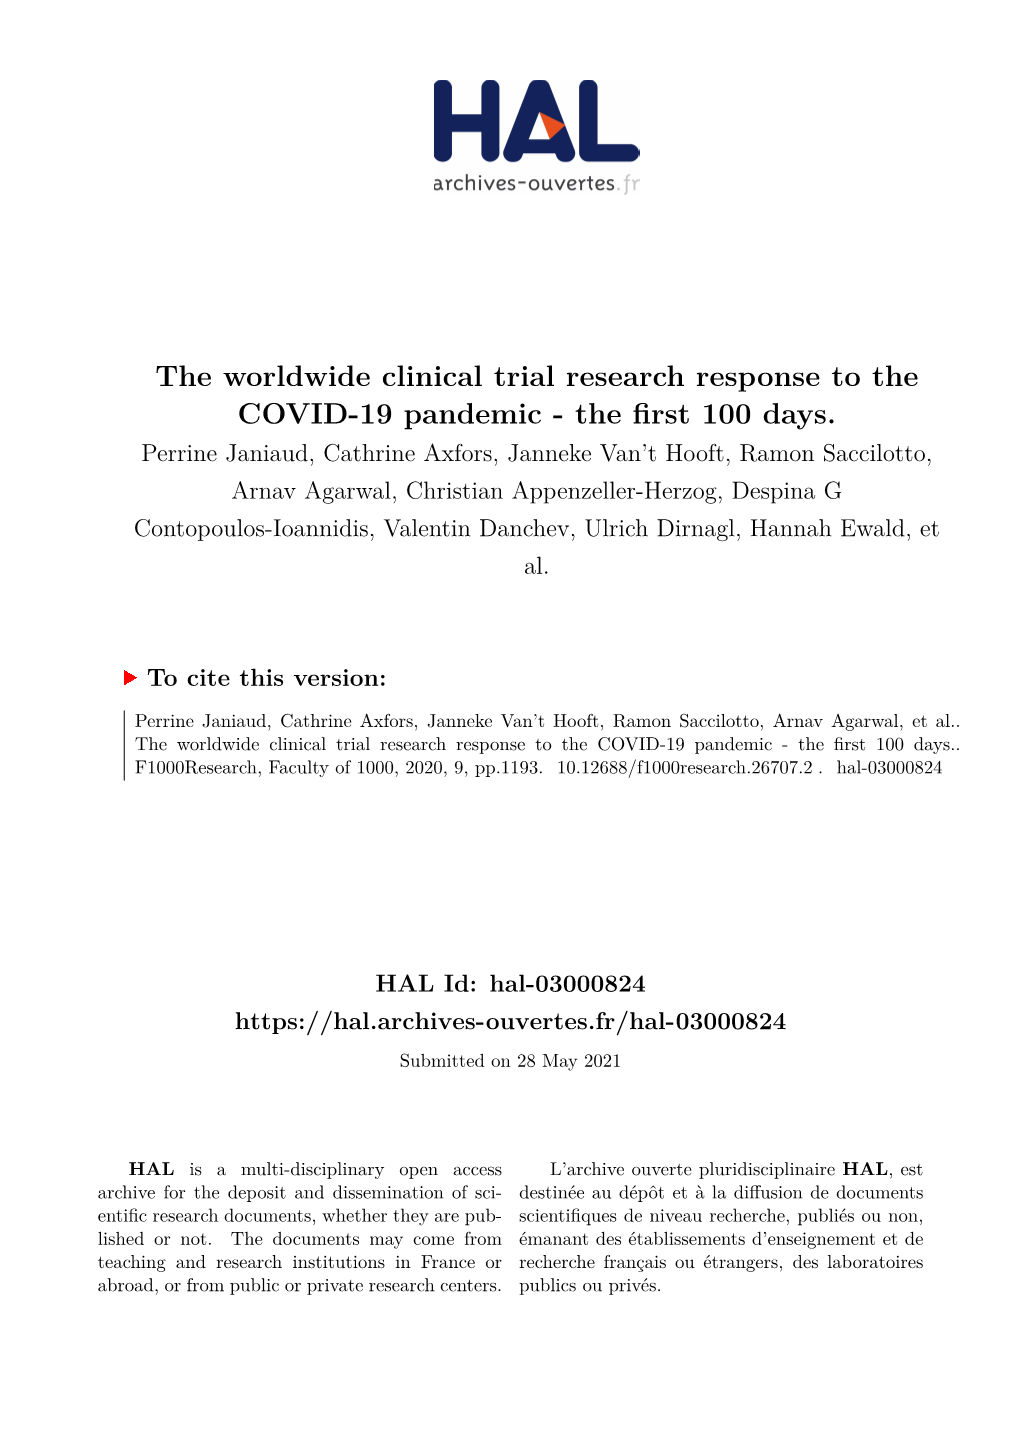 The Worldwide Clinical Trial Research Response to the COVID-19 Pandemic - the First 100 Days